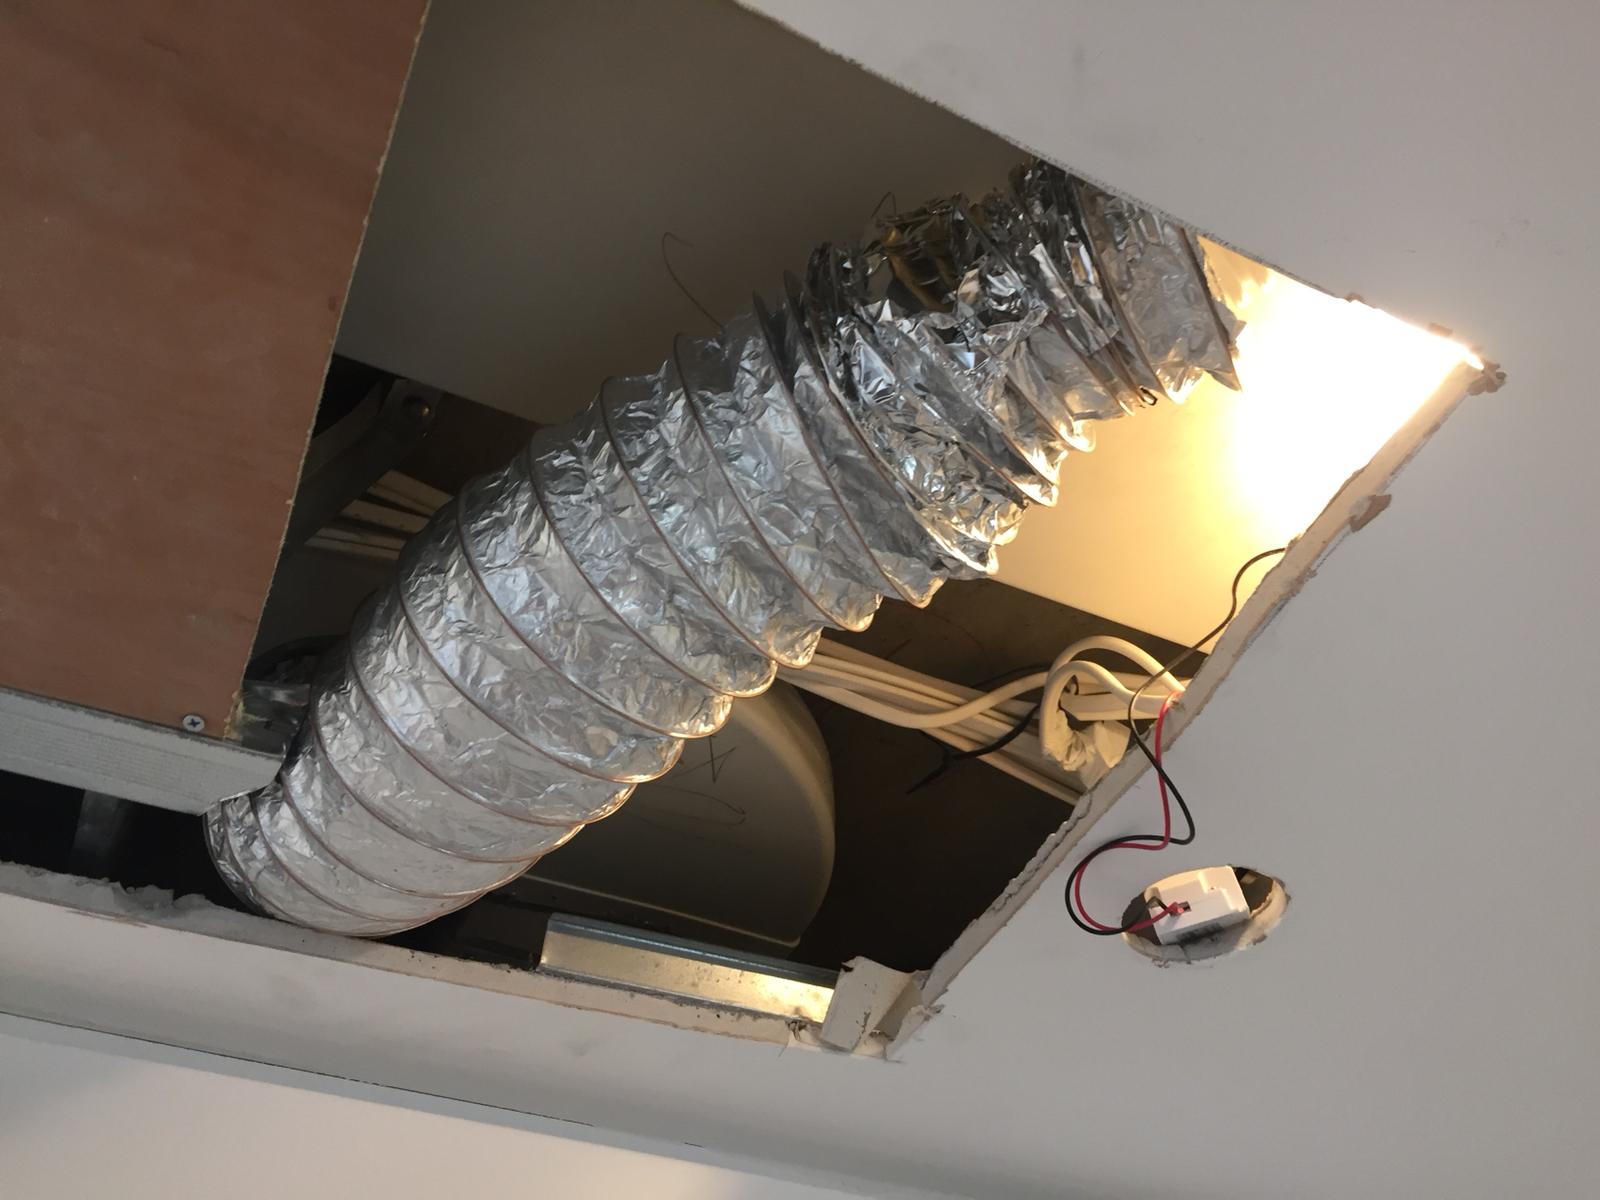 Badly fitted flexi-duct used to make ducting fit - poorly taped MVHR